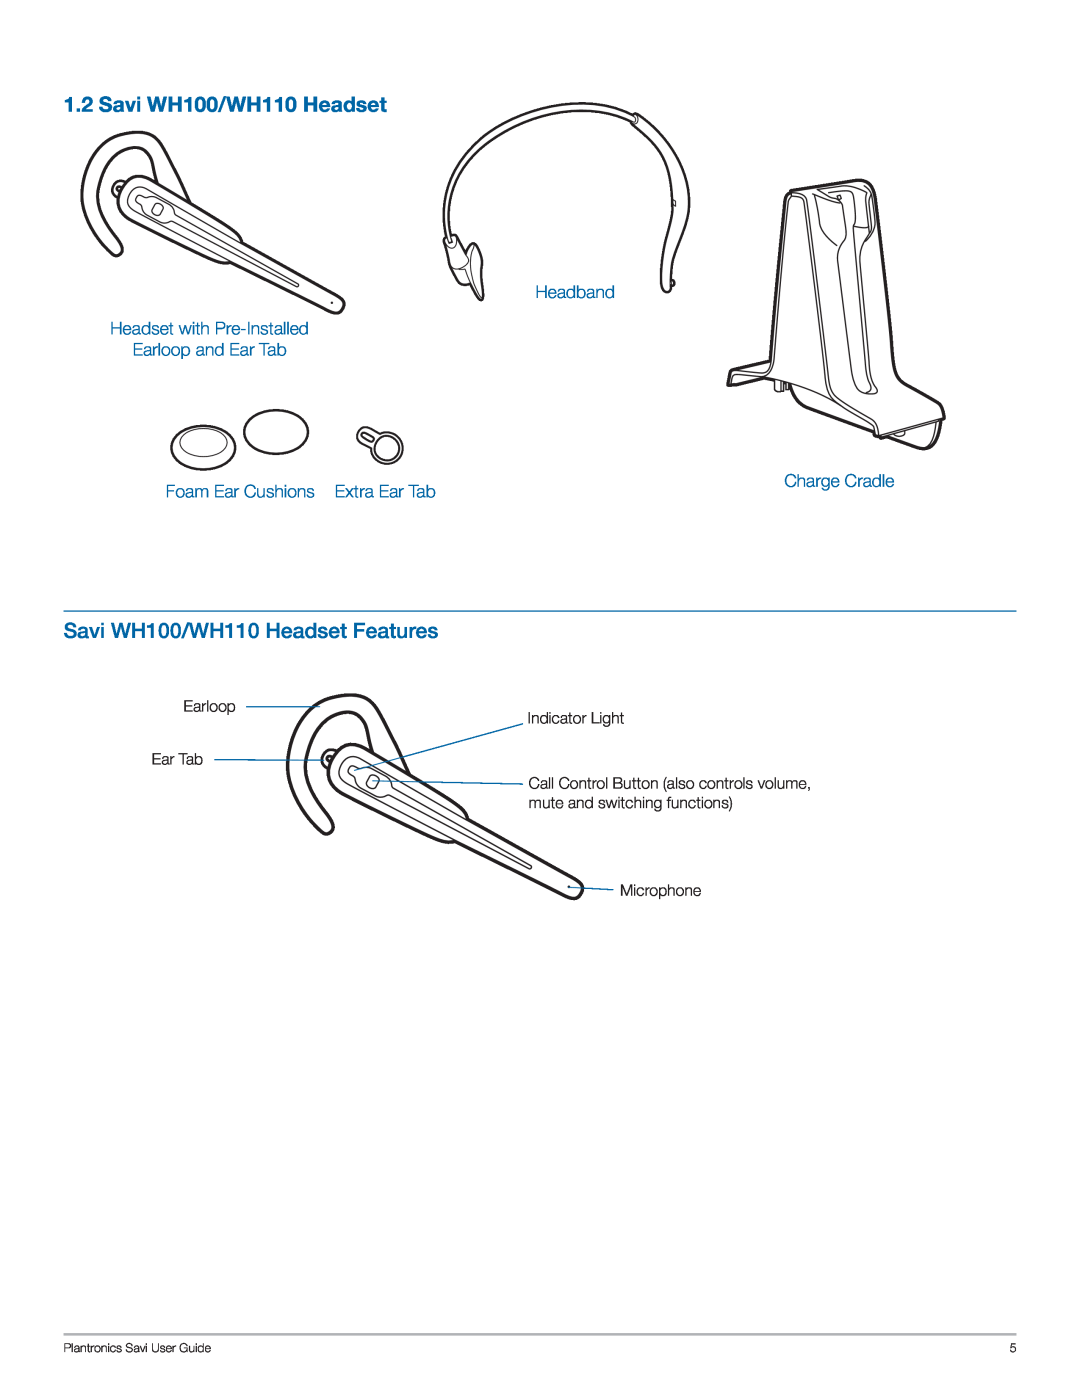 Plantronics WO101 manual Savi WH100/WH110 Headset Features, Headband Headset with Pre-Installed, Earloop and Ear Tab 